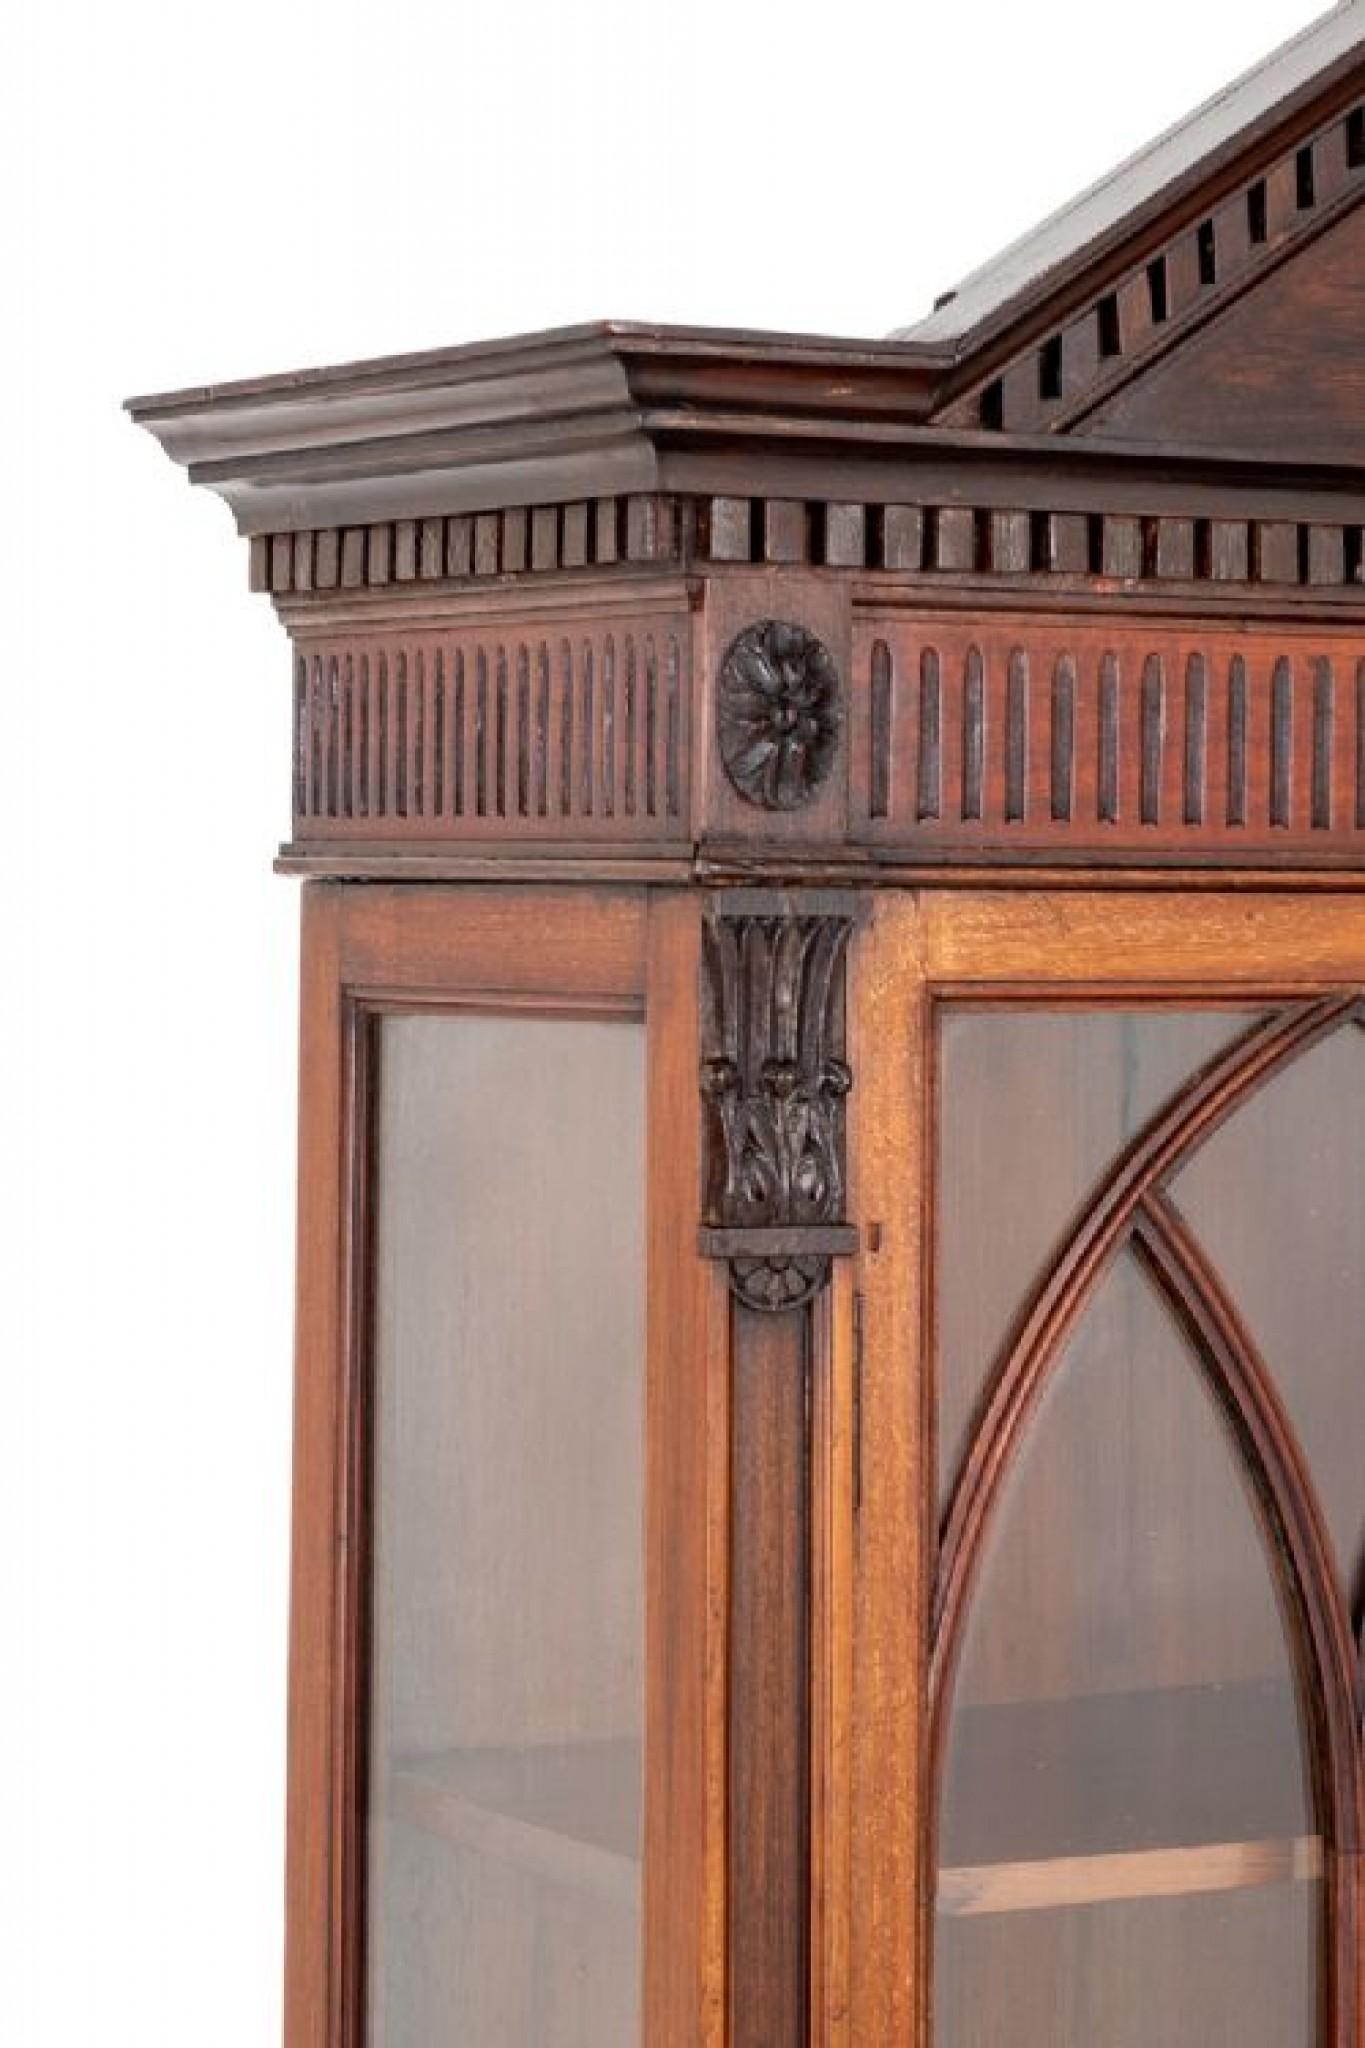 Matched Pair of Mahogany Adams Style display cabinets.
These Rater Attractive Cabinets are of Diminutive Form.
circa 1900
Raised upon Shaped Legs with Ebony Line Inlays.
The Shaped Frieze of the Cabinets Having Fluted Detail, Carved Swags and